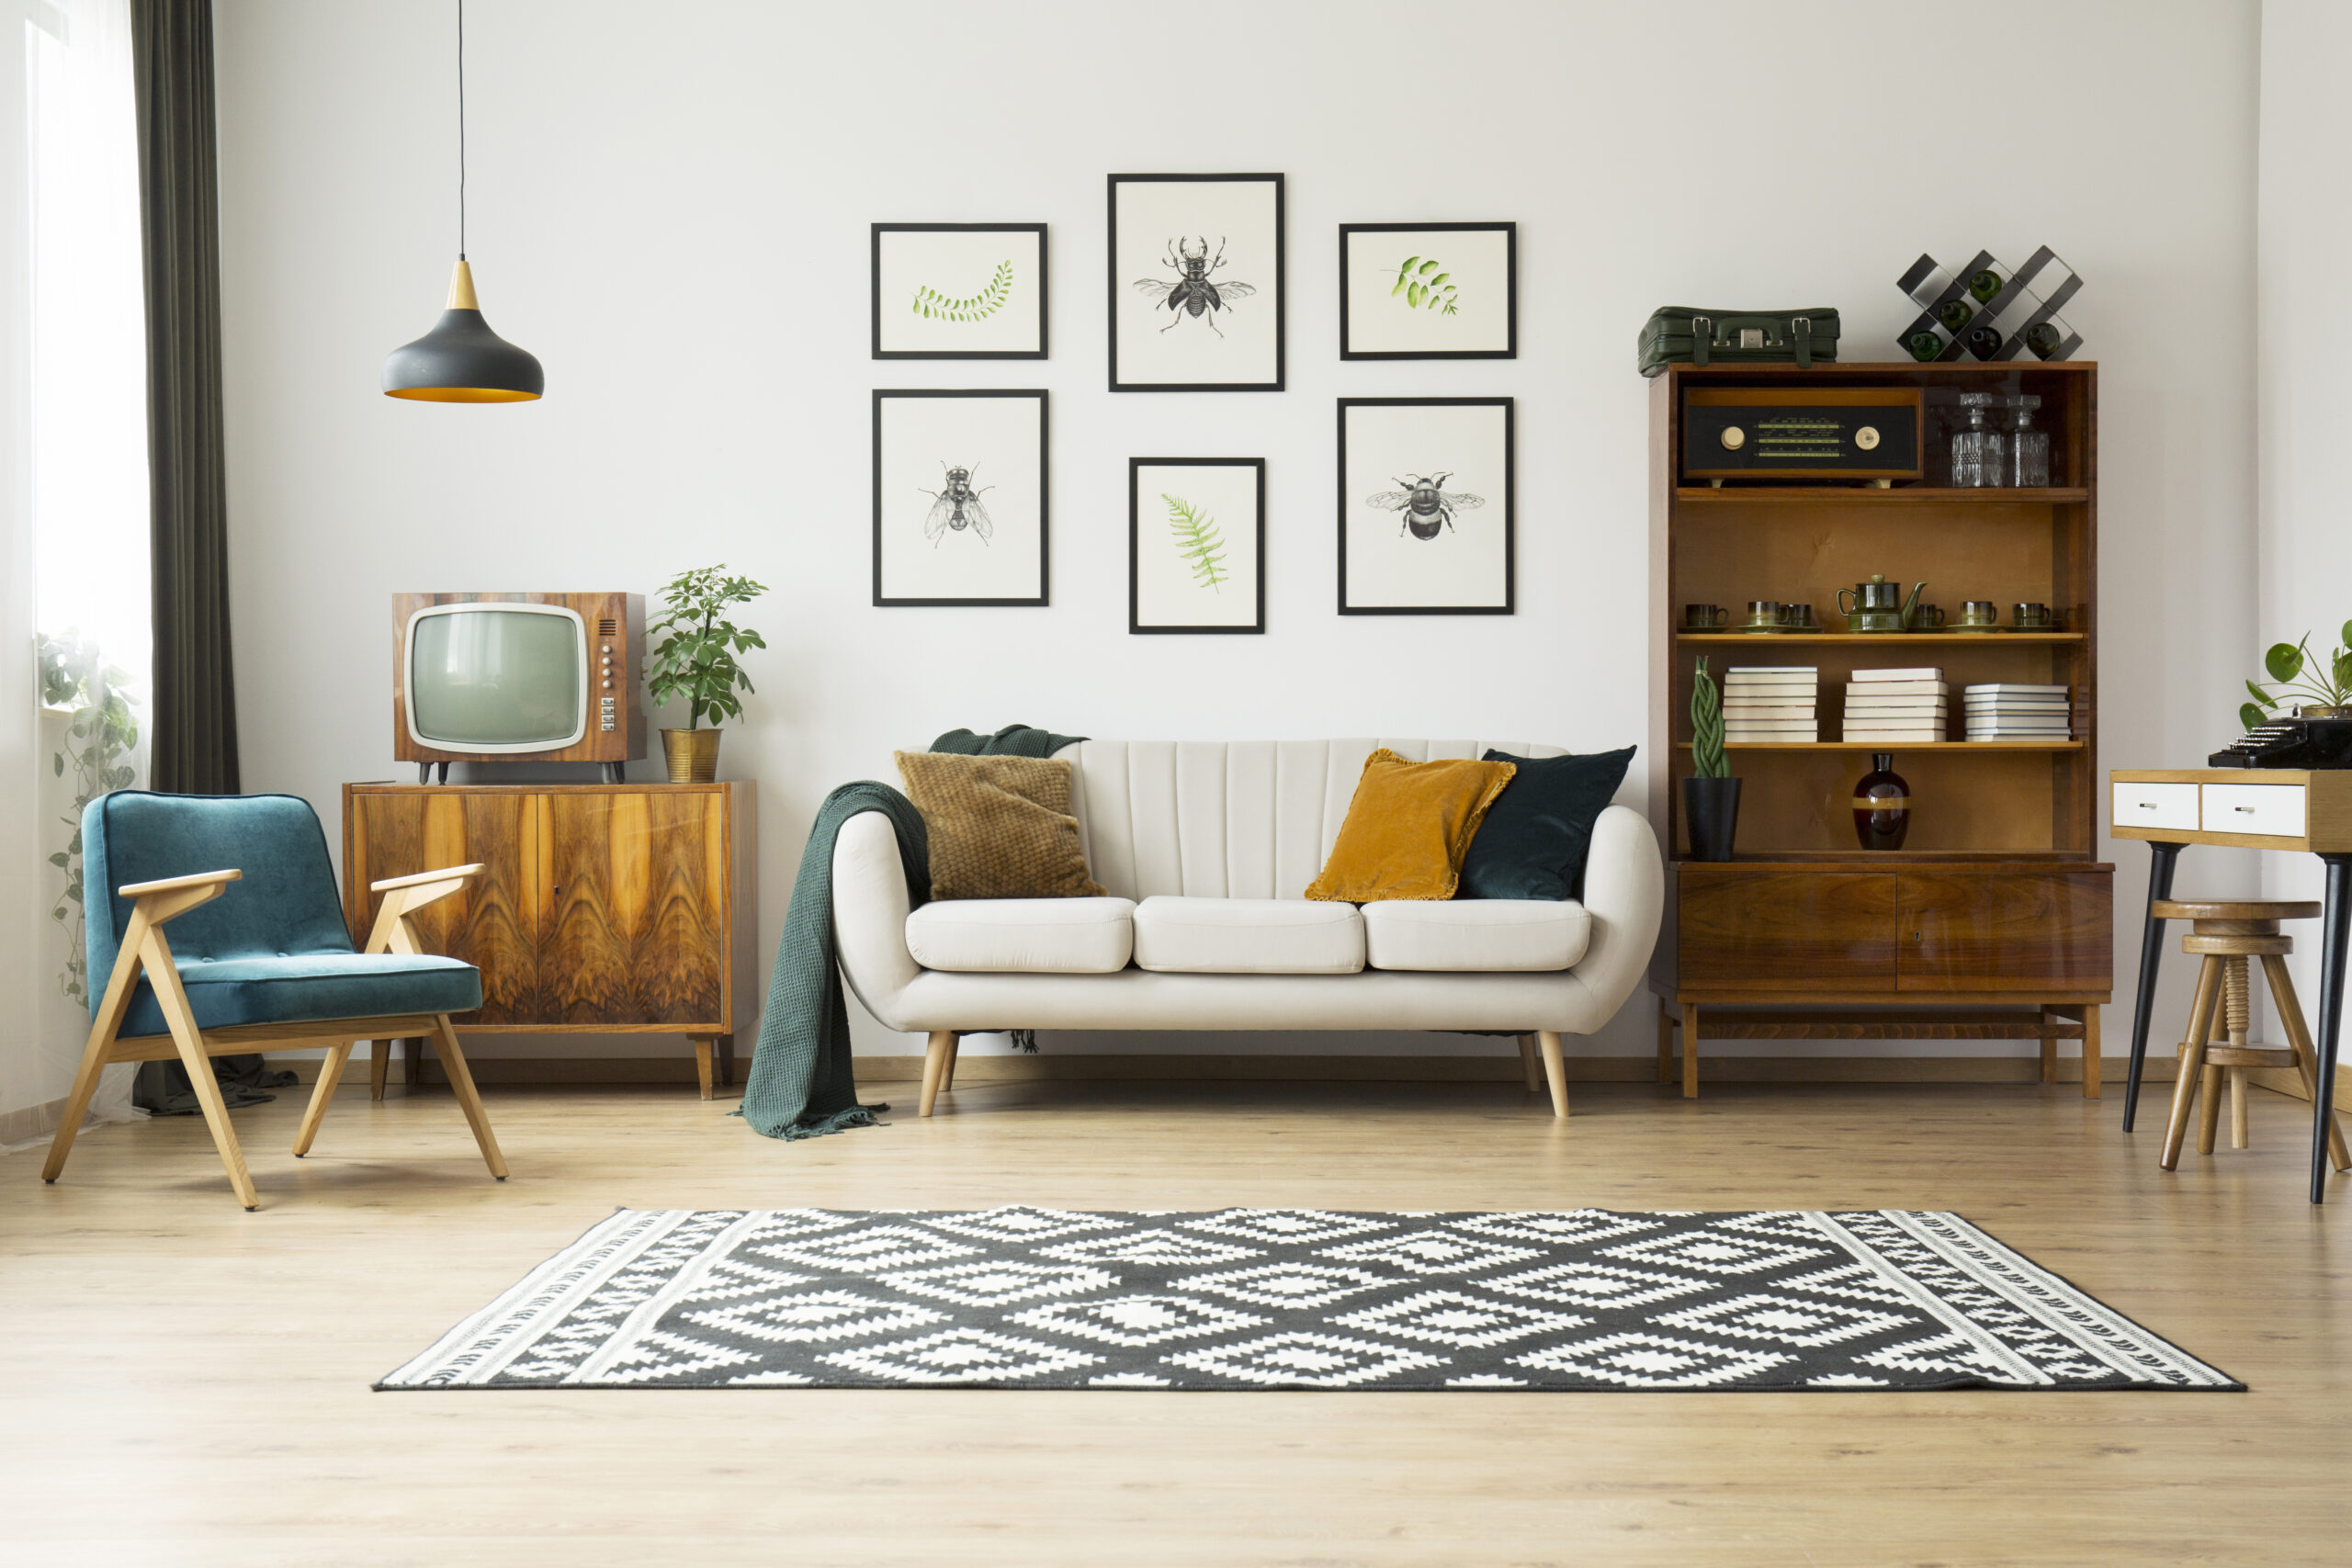 Vintage Retro Design Style Living Room with beige sofa and old TV and stereo